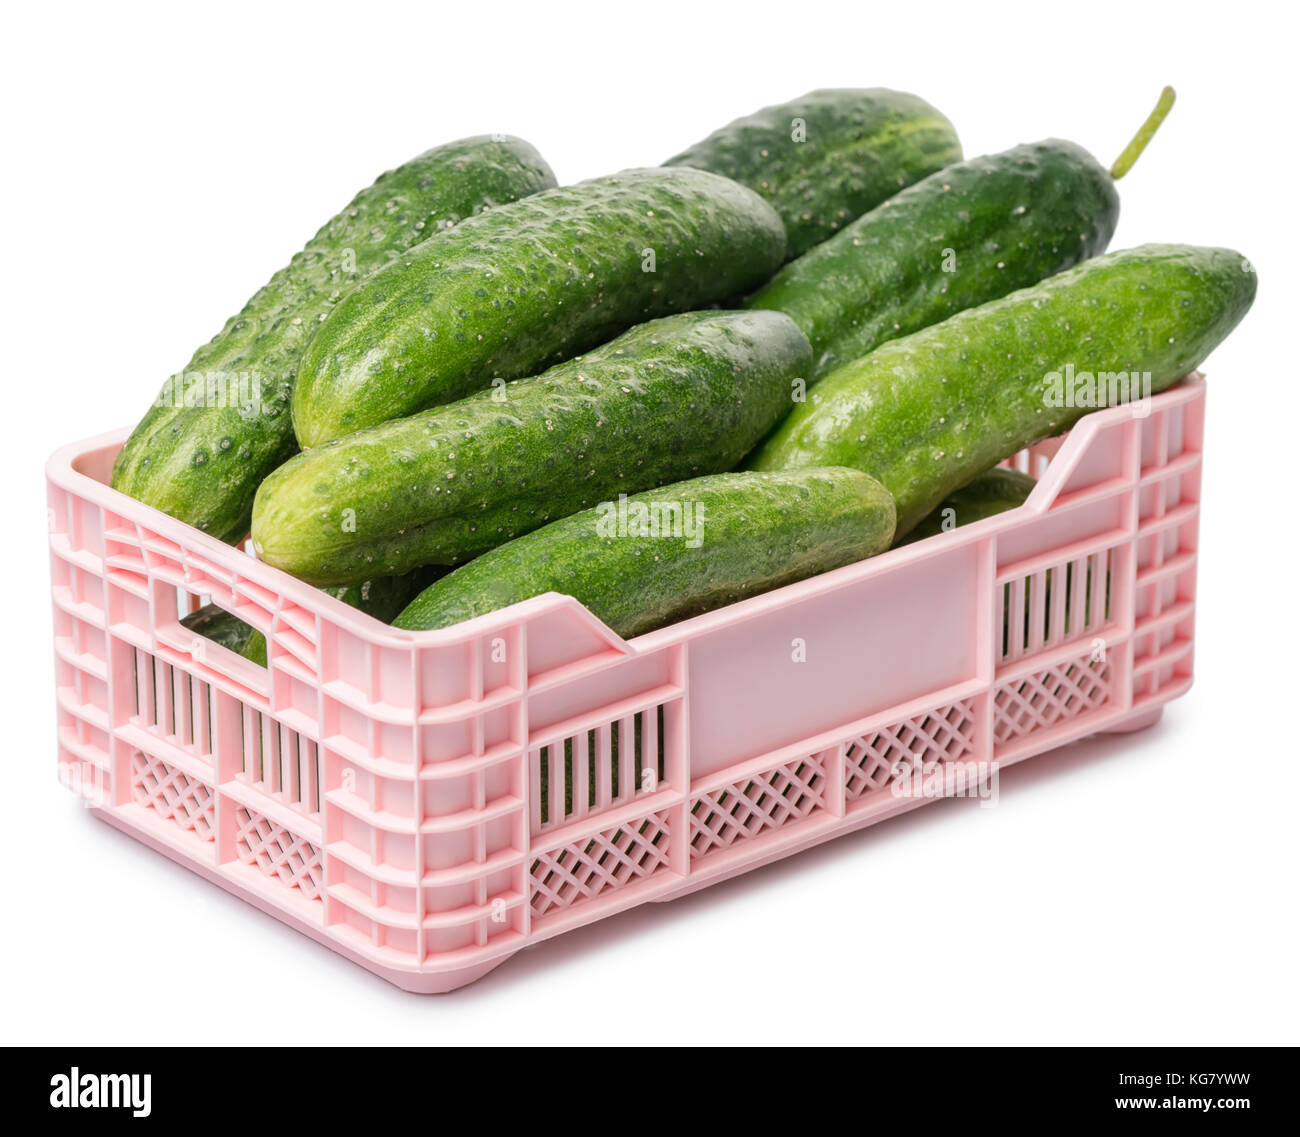 full vegetable box with cucumber isolated on white background, concept raw food Stock Photo